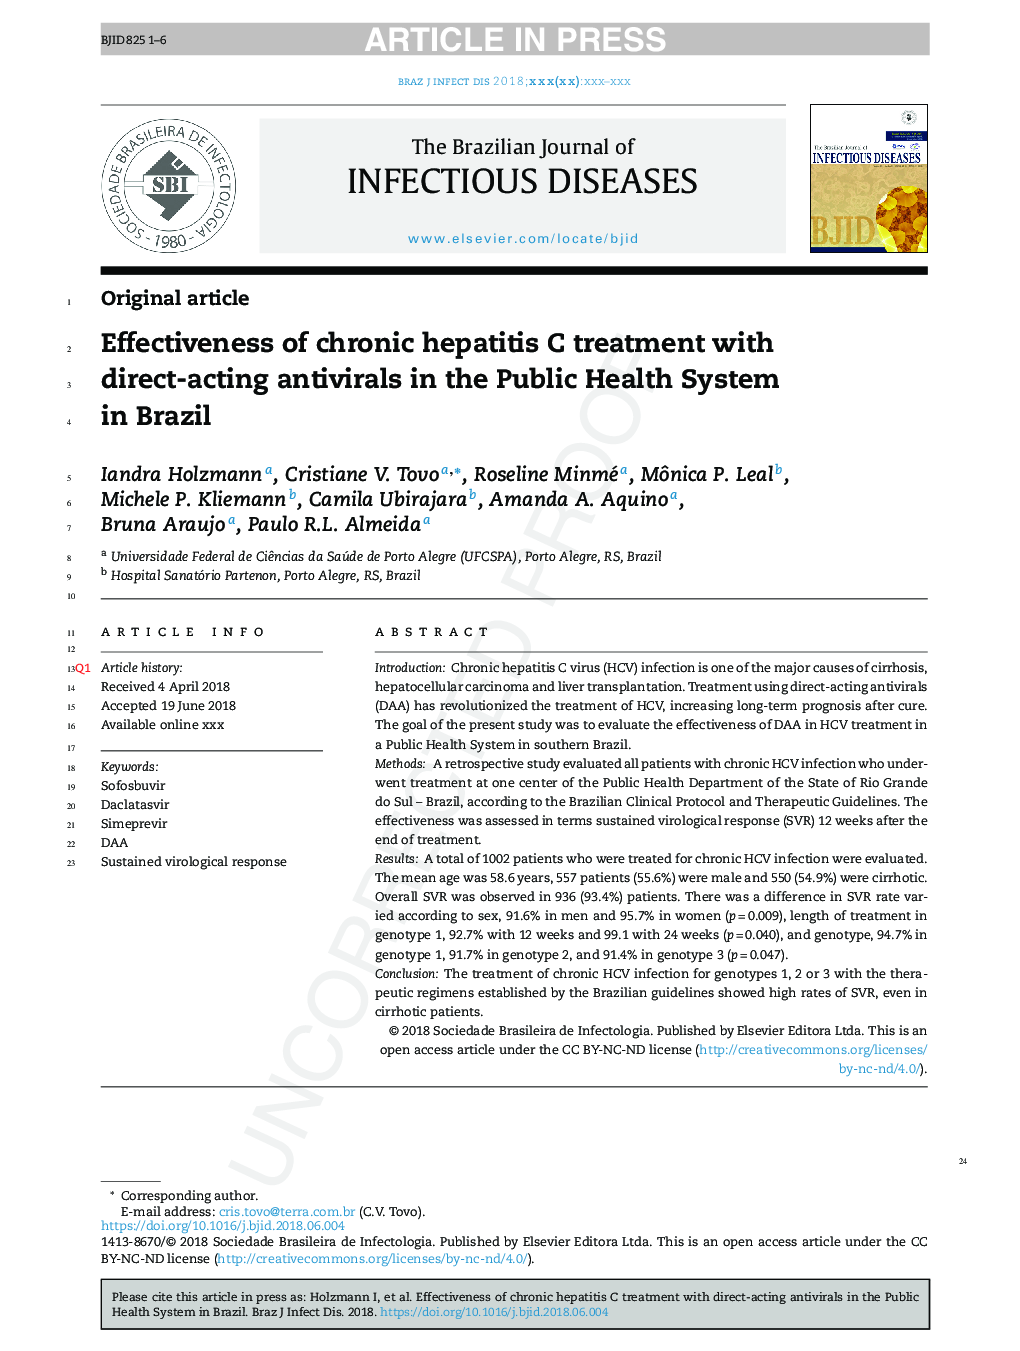 Effectiveness of chronic hepatitis C treatment with direct-acting antivirals in the Public Health System in Brazil